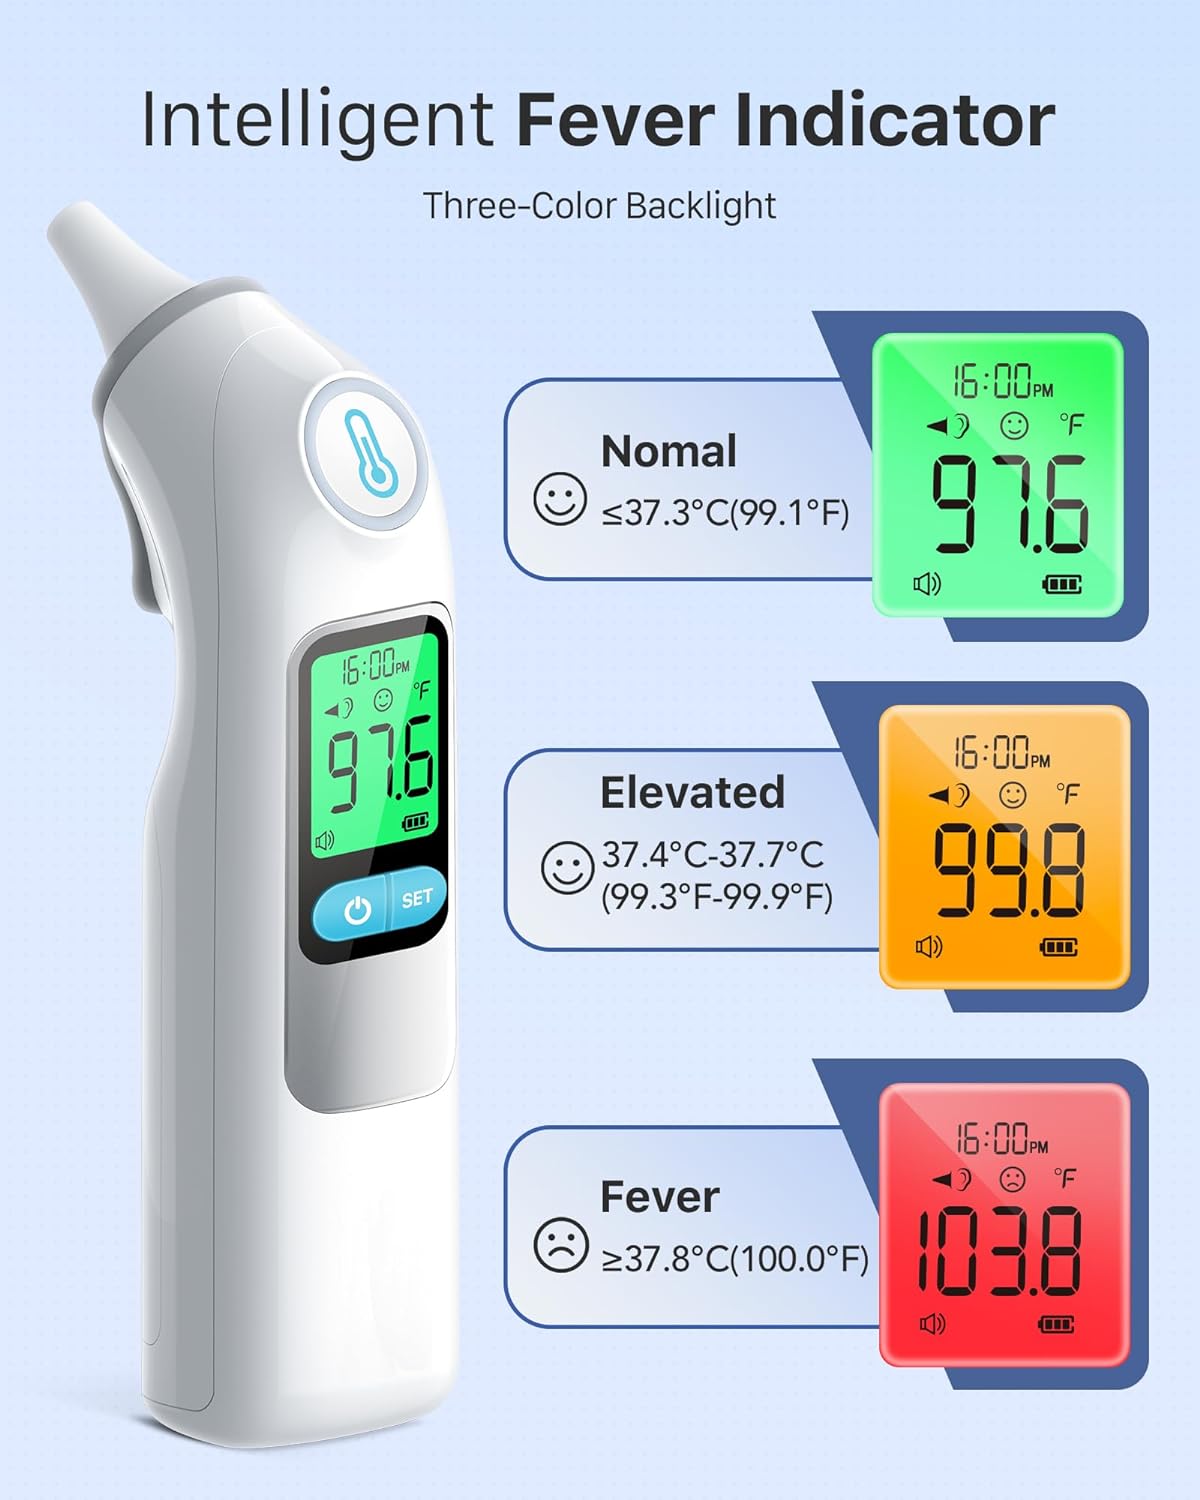 Femometer Family Ear Thermometer, Highly Accurate Ear Thermometer for Kids, Adults and Babies, 30 Memory Recall, 1s Result and 3-Color Fever Alert, with Disposable Probe Covers, Home & Office Use